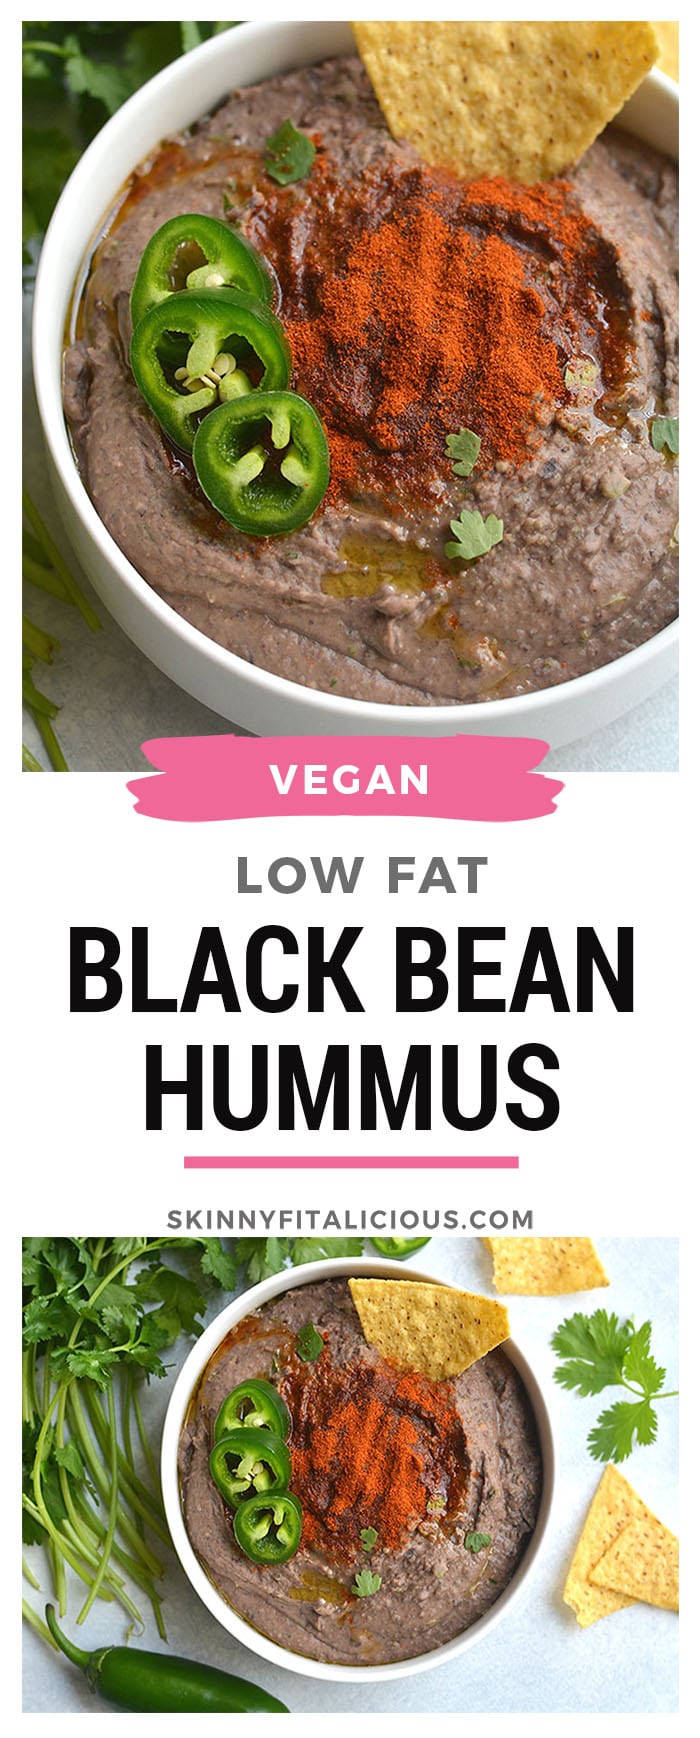 Spicy Black Bean Hummus Without Tahini lightened up by omitting the traditional ingredient without sacrificing taste. Pair with veggies & crackers for a healthy snack or spread on sandwich for extra protein & spice! Gluten Free + Vegan + Low Calorie